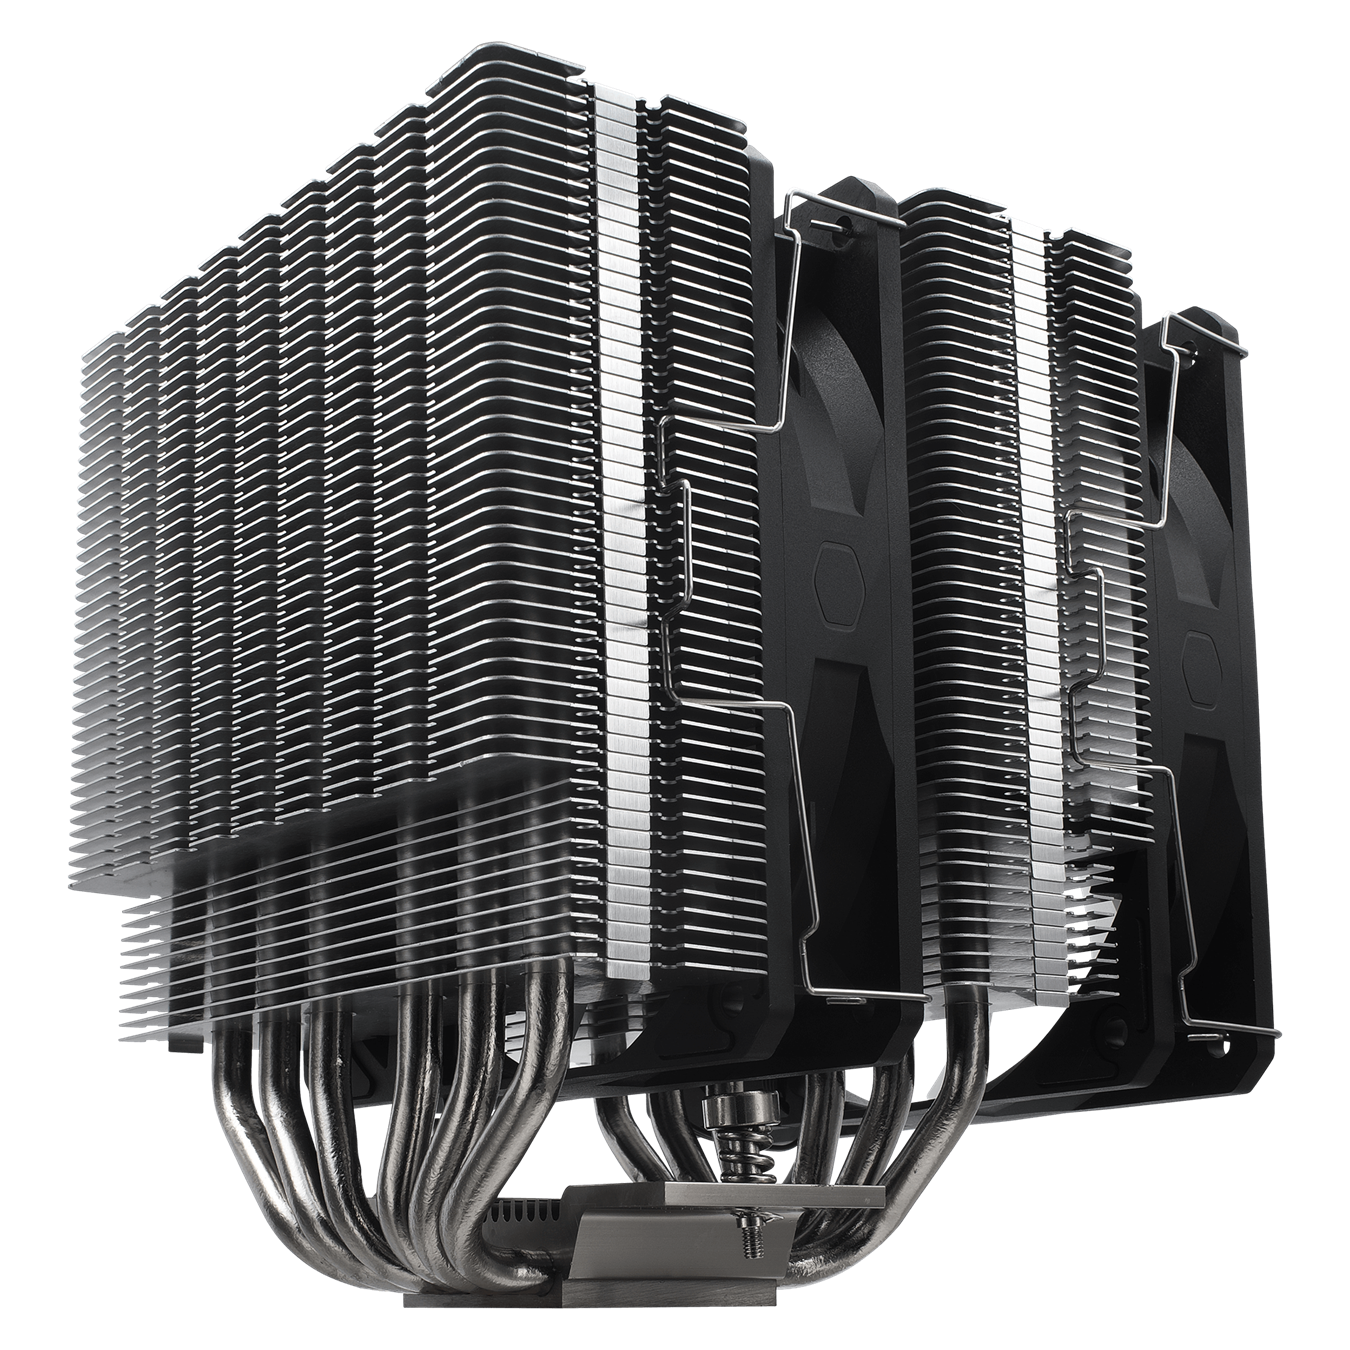 Cooler Master HYPER 620S Automatic ARGB,  Controllable lighting,  Dual tower heat sink,  6 nickel-plated heat pipes,  Minimal height,  High-performance Cryofuze (RR-D6NA-17PA-R1)